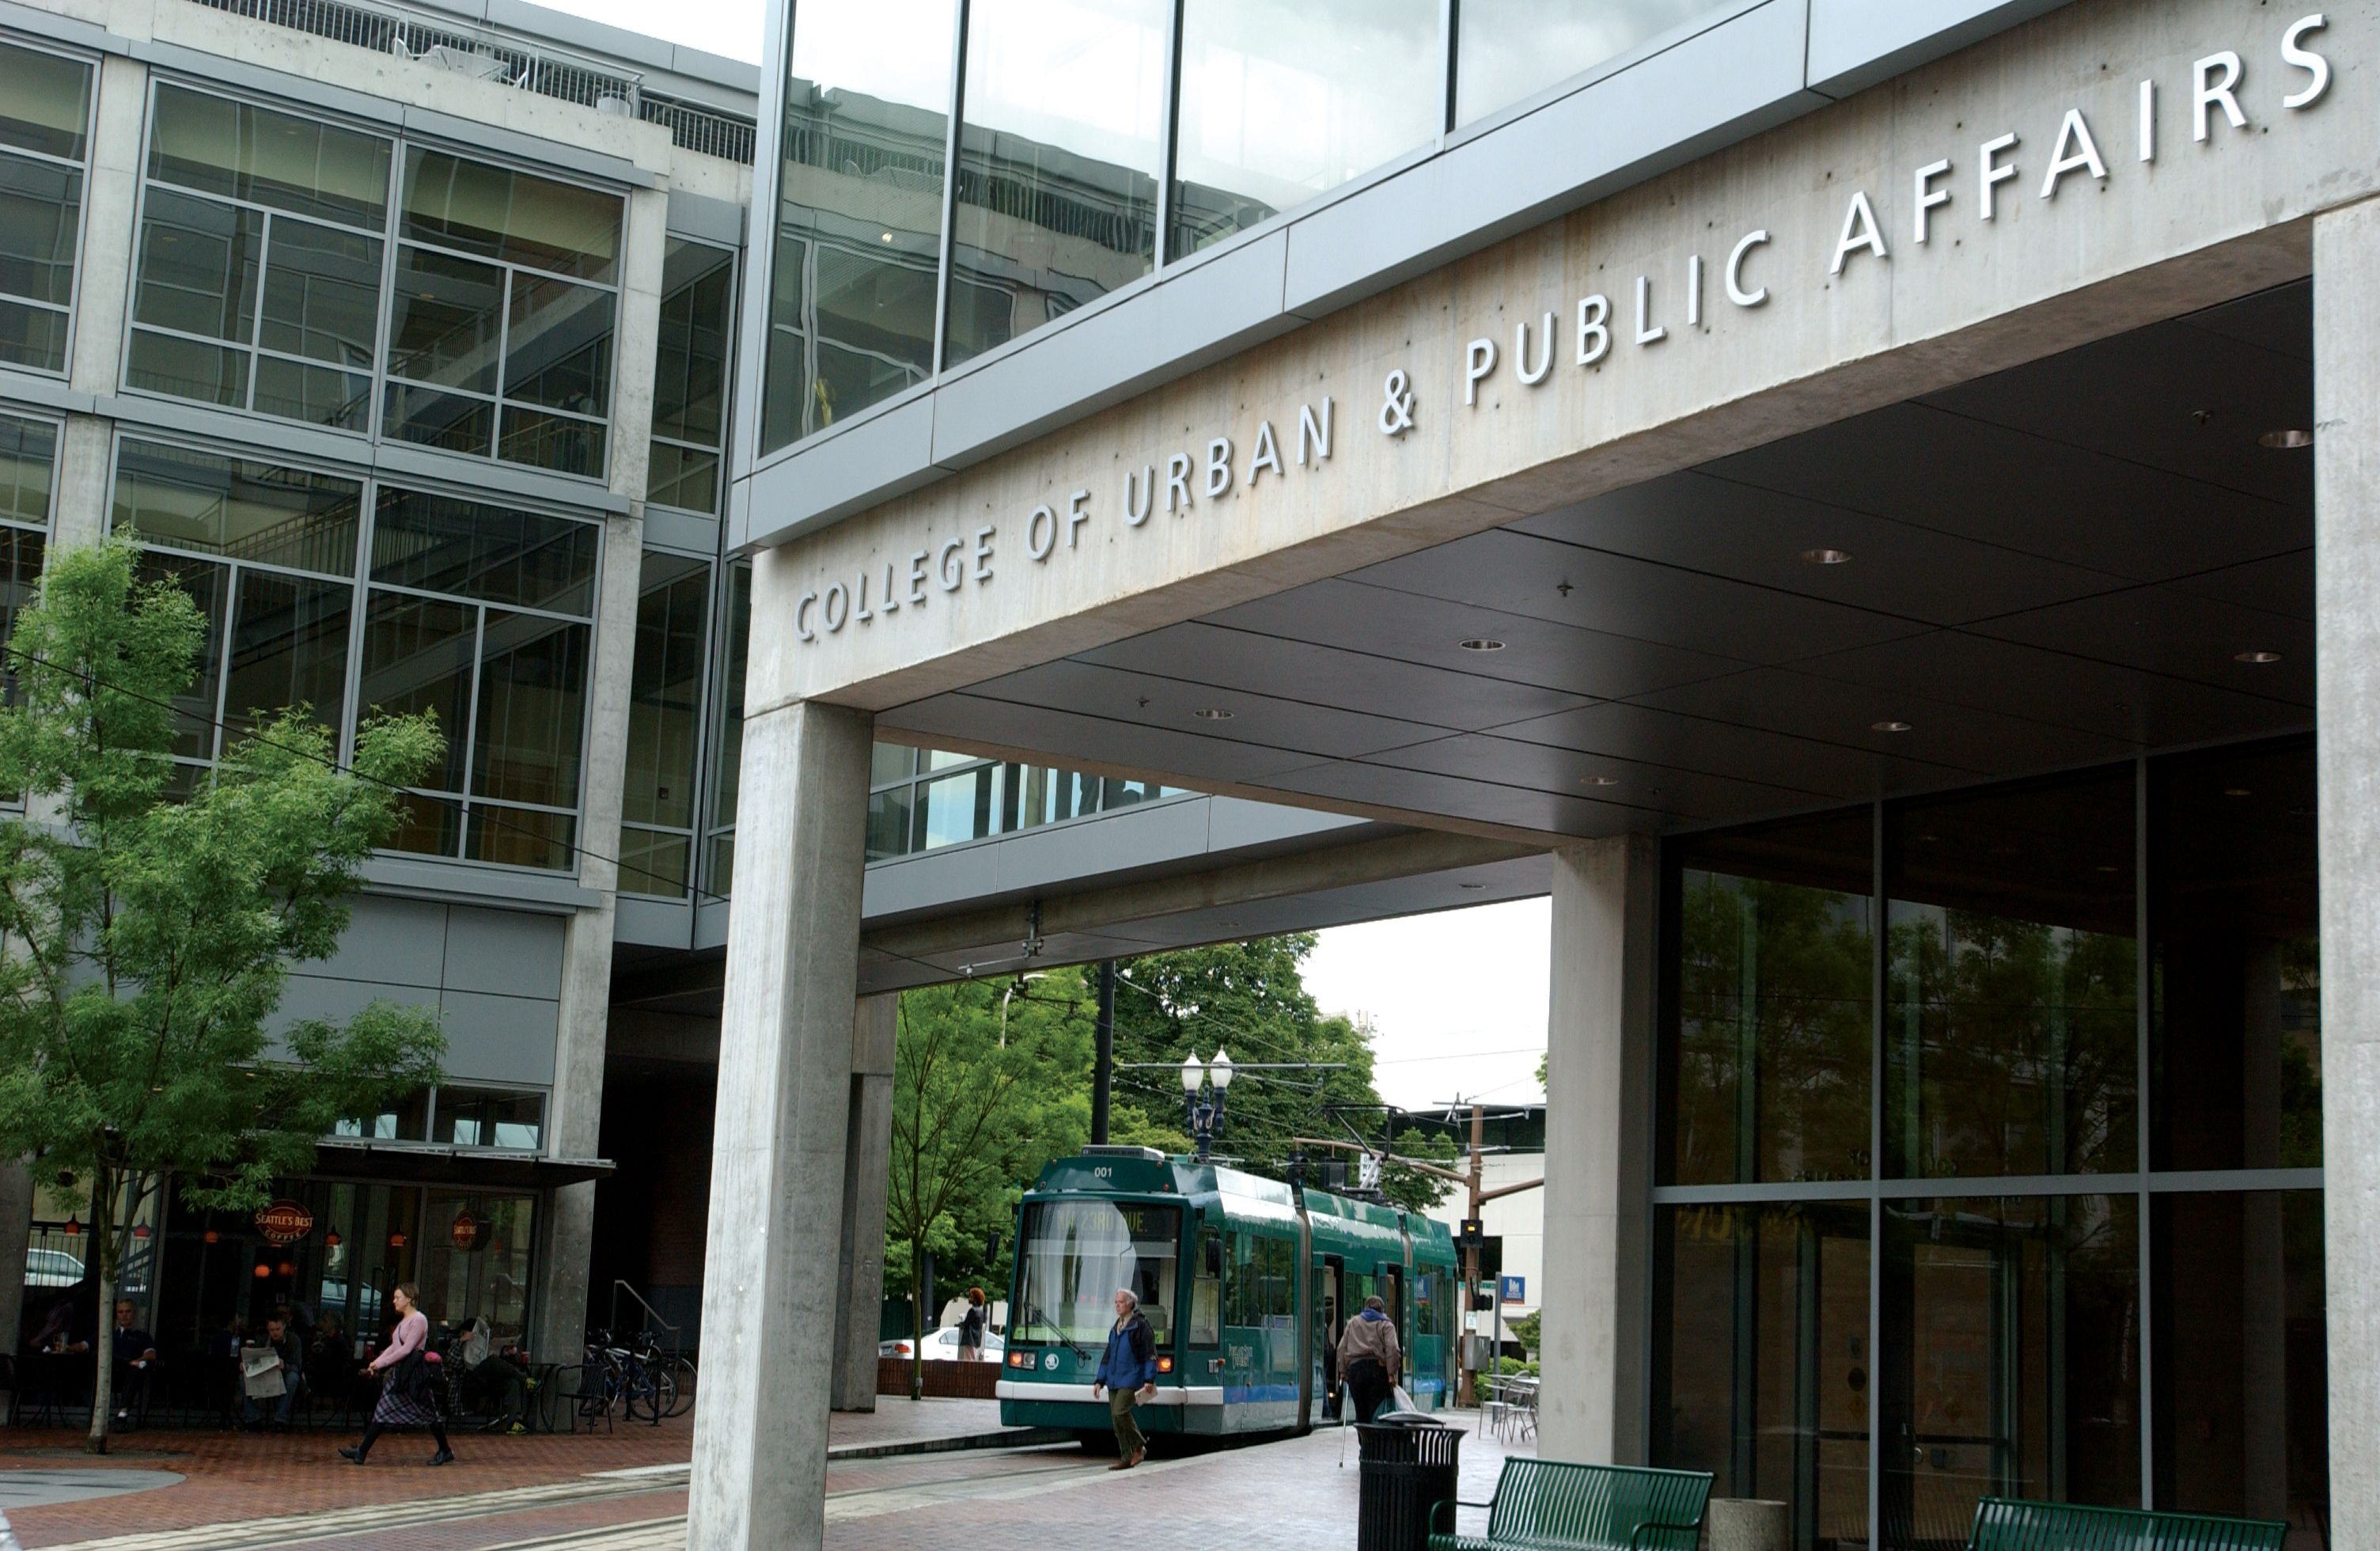 College of Urban and Public Affairs at Portland State University